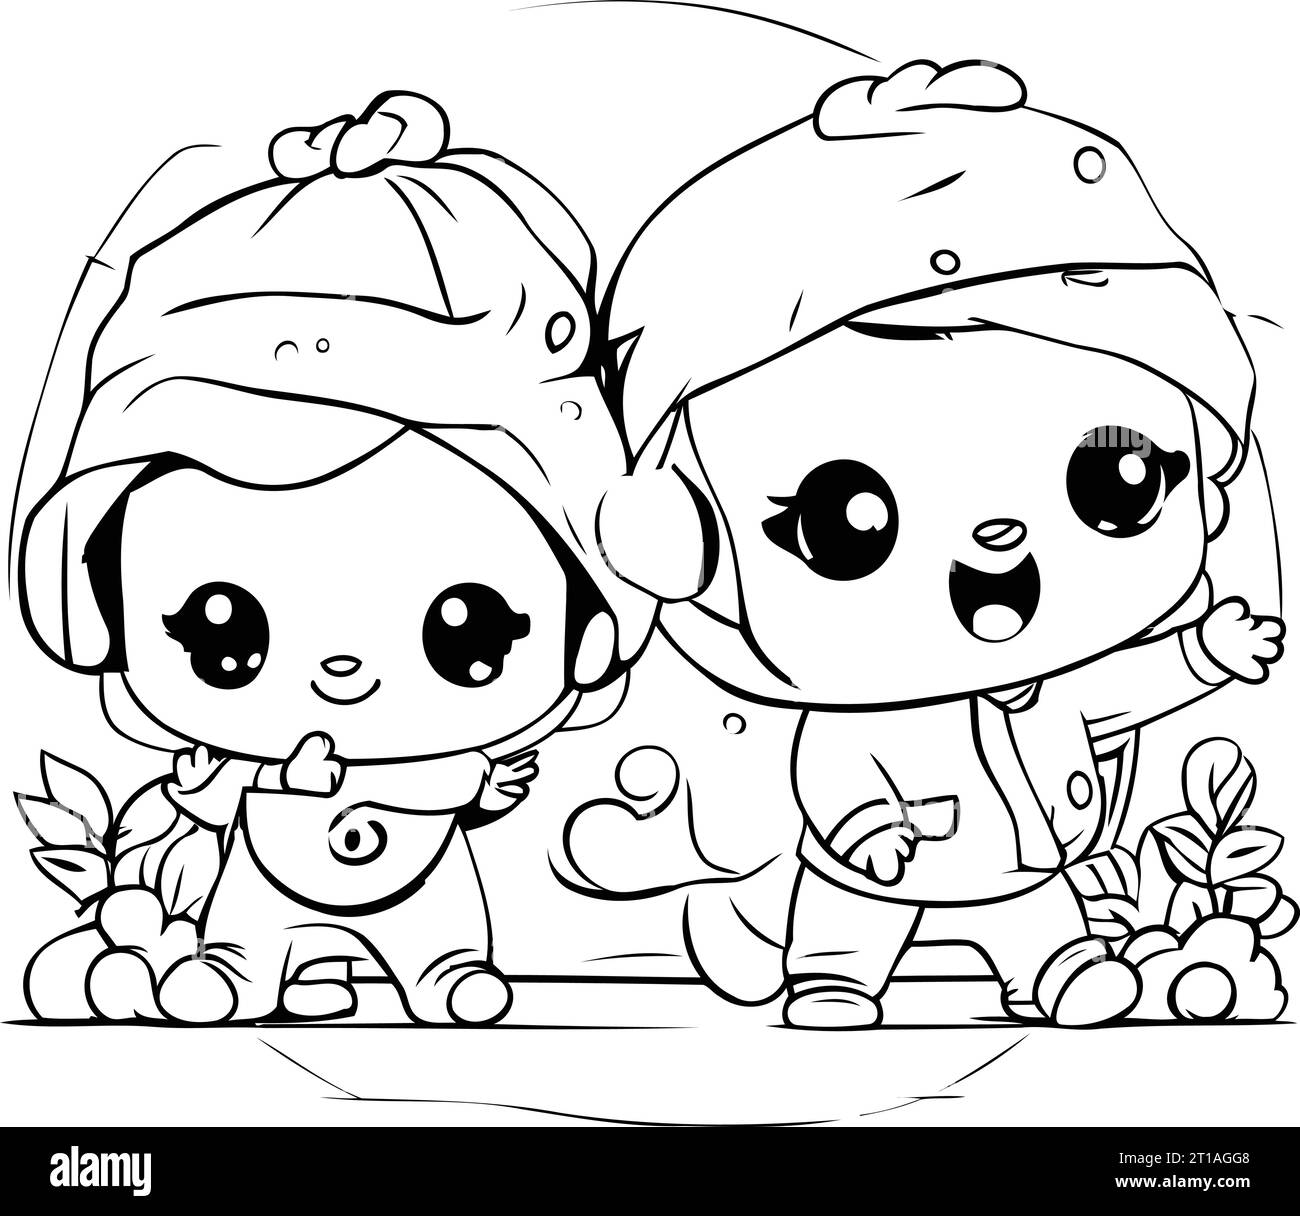 cute little boy and girl cartoon vector illustration graphic design in black and white Stock Vector